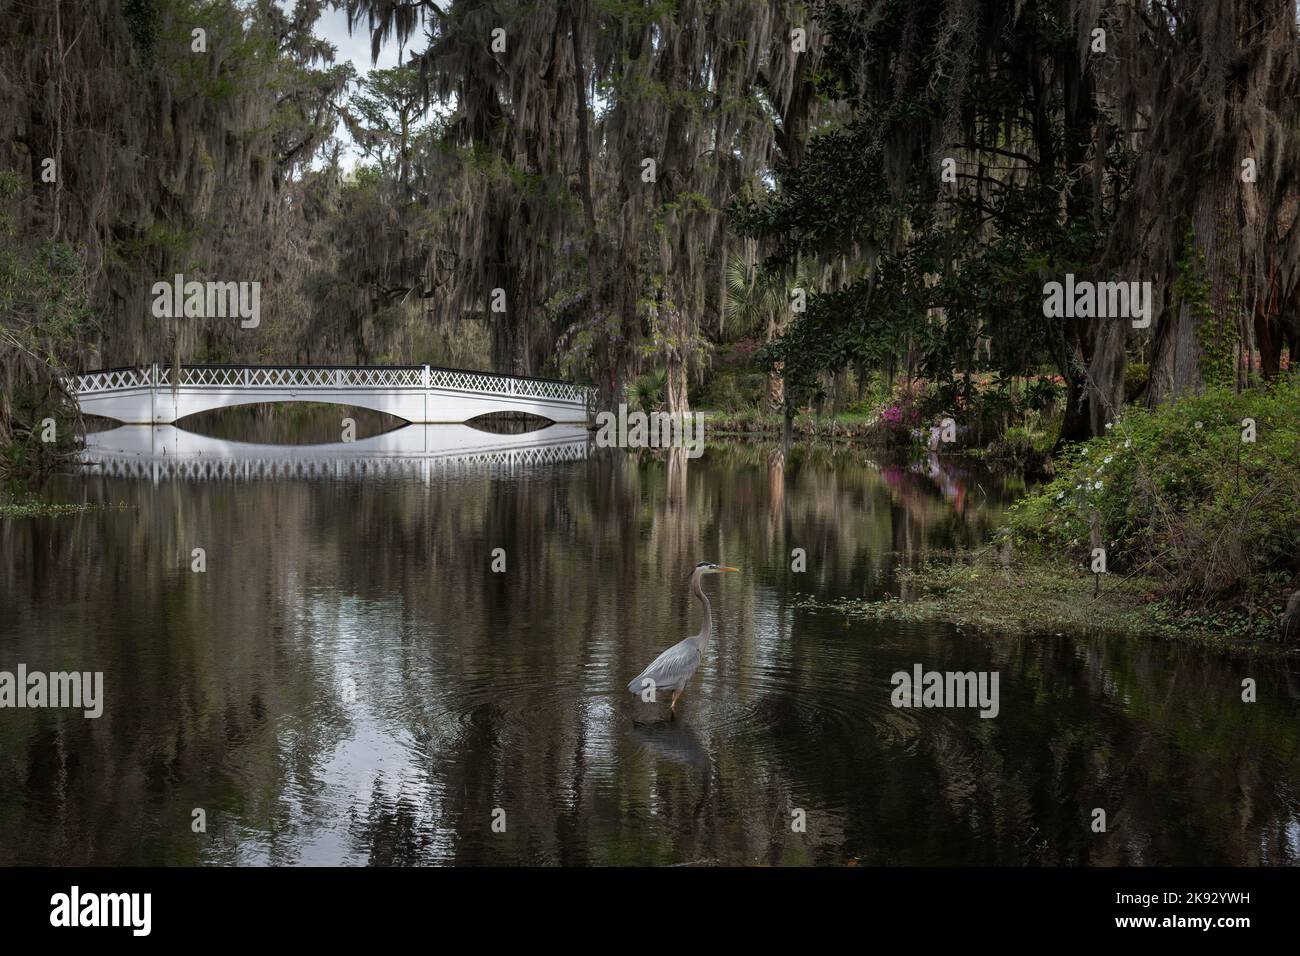 White bridge reflected in the water of a swamp surrounded by trees covered in Spanish Moss with Great Blue Heron in the foreground. Stock Photo